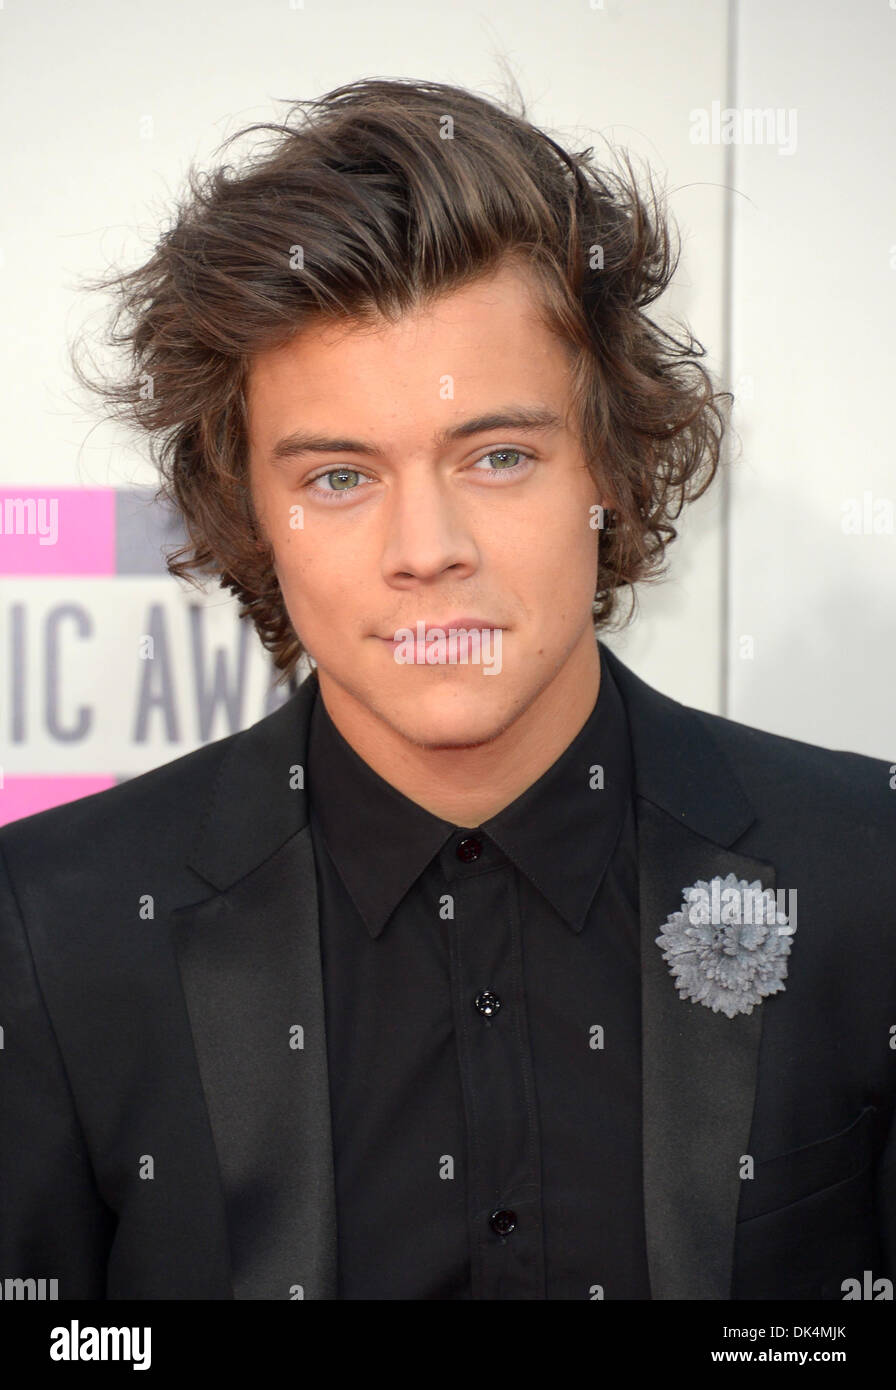 Harry Styles arrives at the American Music Awards, Los Angeles, America - 24 Nov 2013 Stock Photo